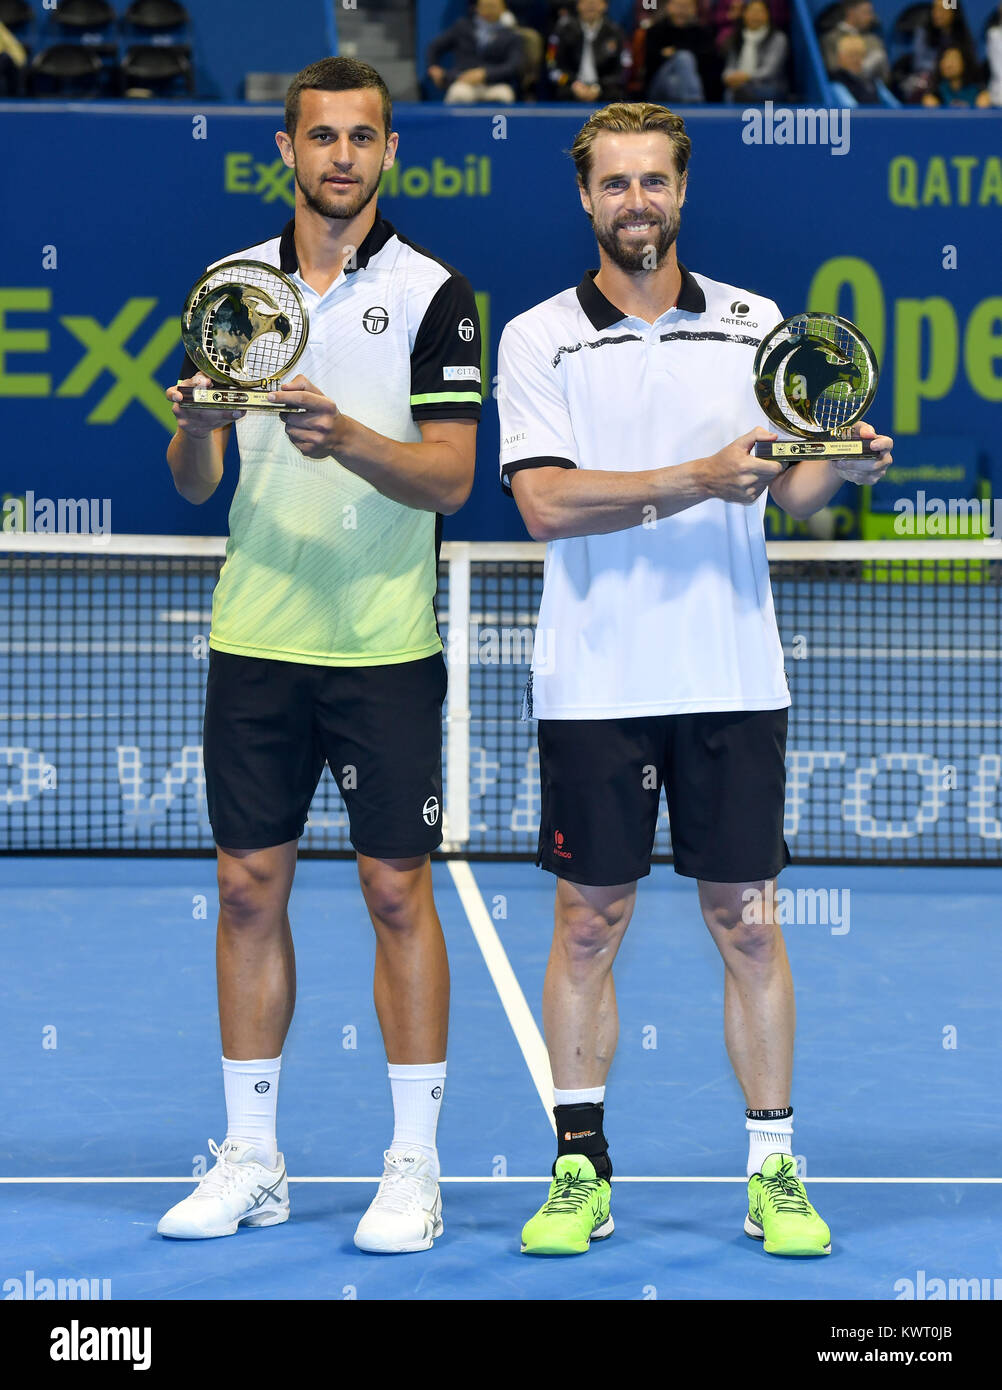 Doha, Qatar. 5th Jan, 2018. Mate Pavic (L) of Croatia and Oliver Marach of  Austria pose with the trophies after winning the ATP Qatar Open Tennis  tournament doubles final against Jamie Murray